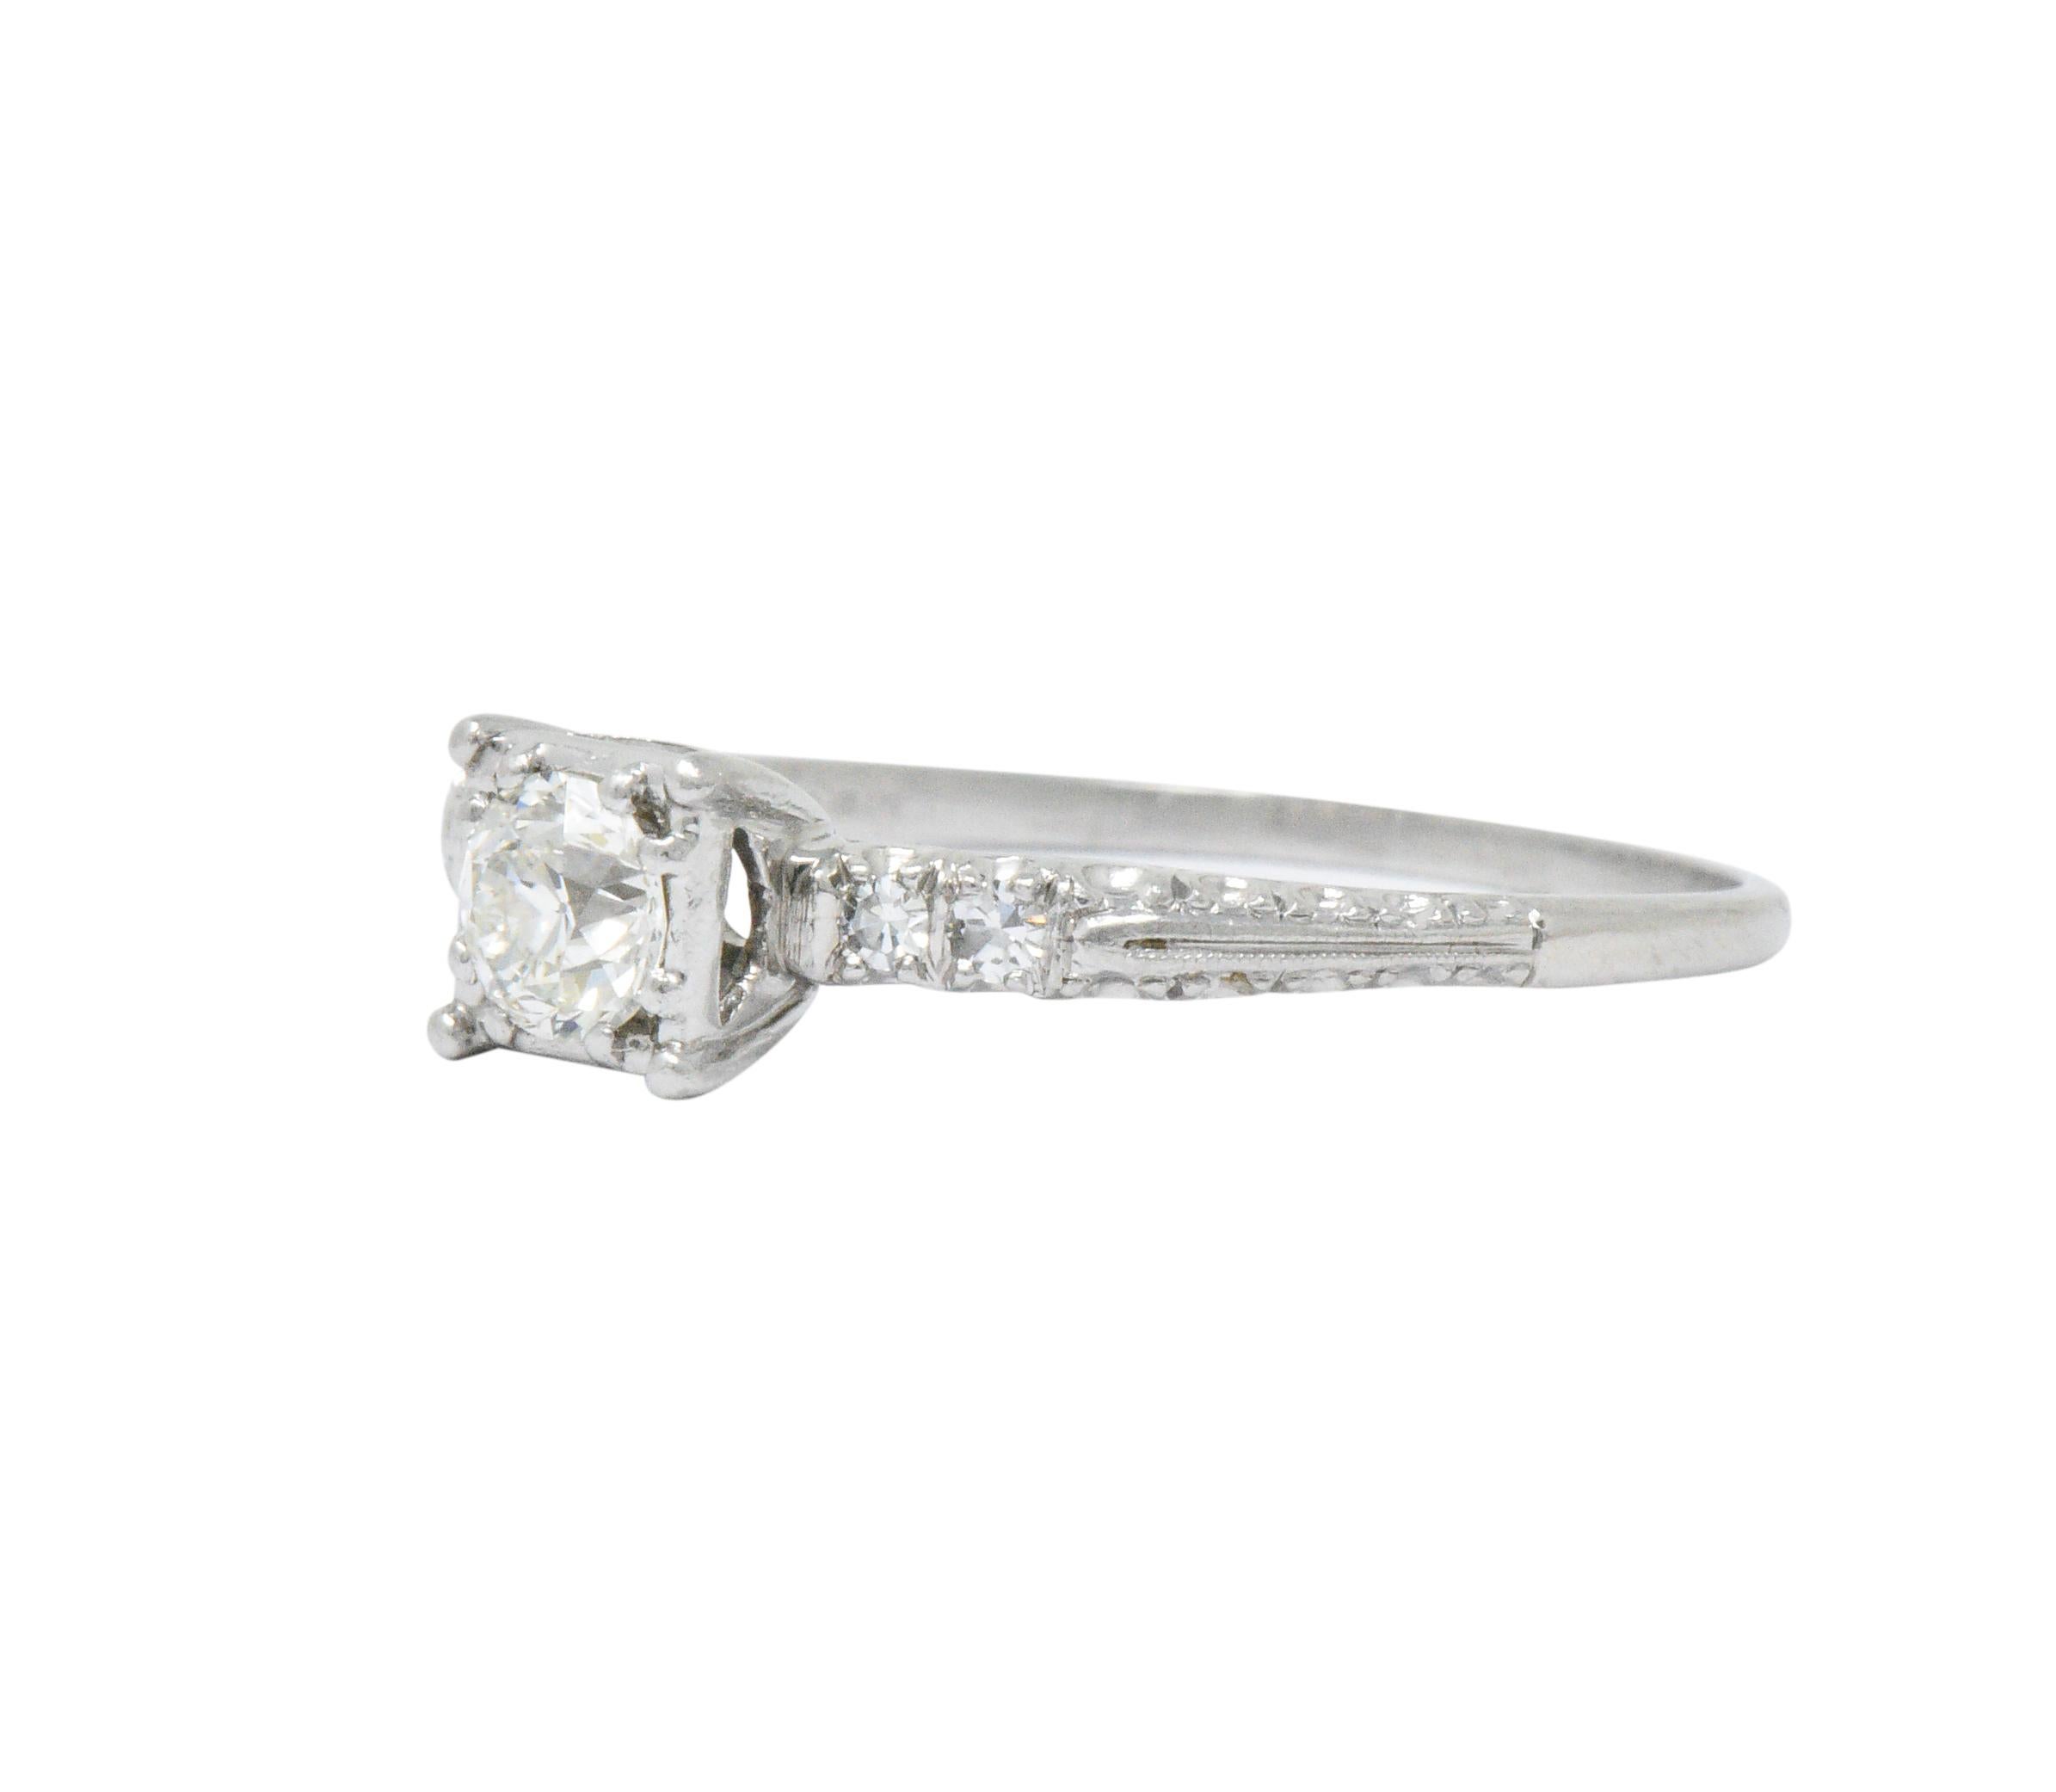 Centering an old European cut diamond weighing approximately 0.45 carat, J color and VS clarity 

Flanked by single cut diamonds weighing approximately 0.08 carat total, G/H color and VS clarity

Square form head with bead set center diamond and